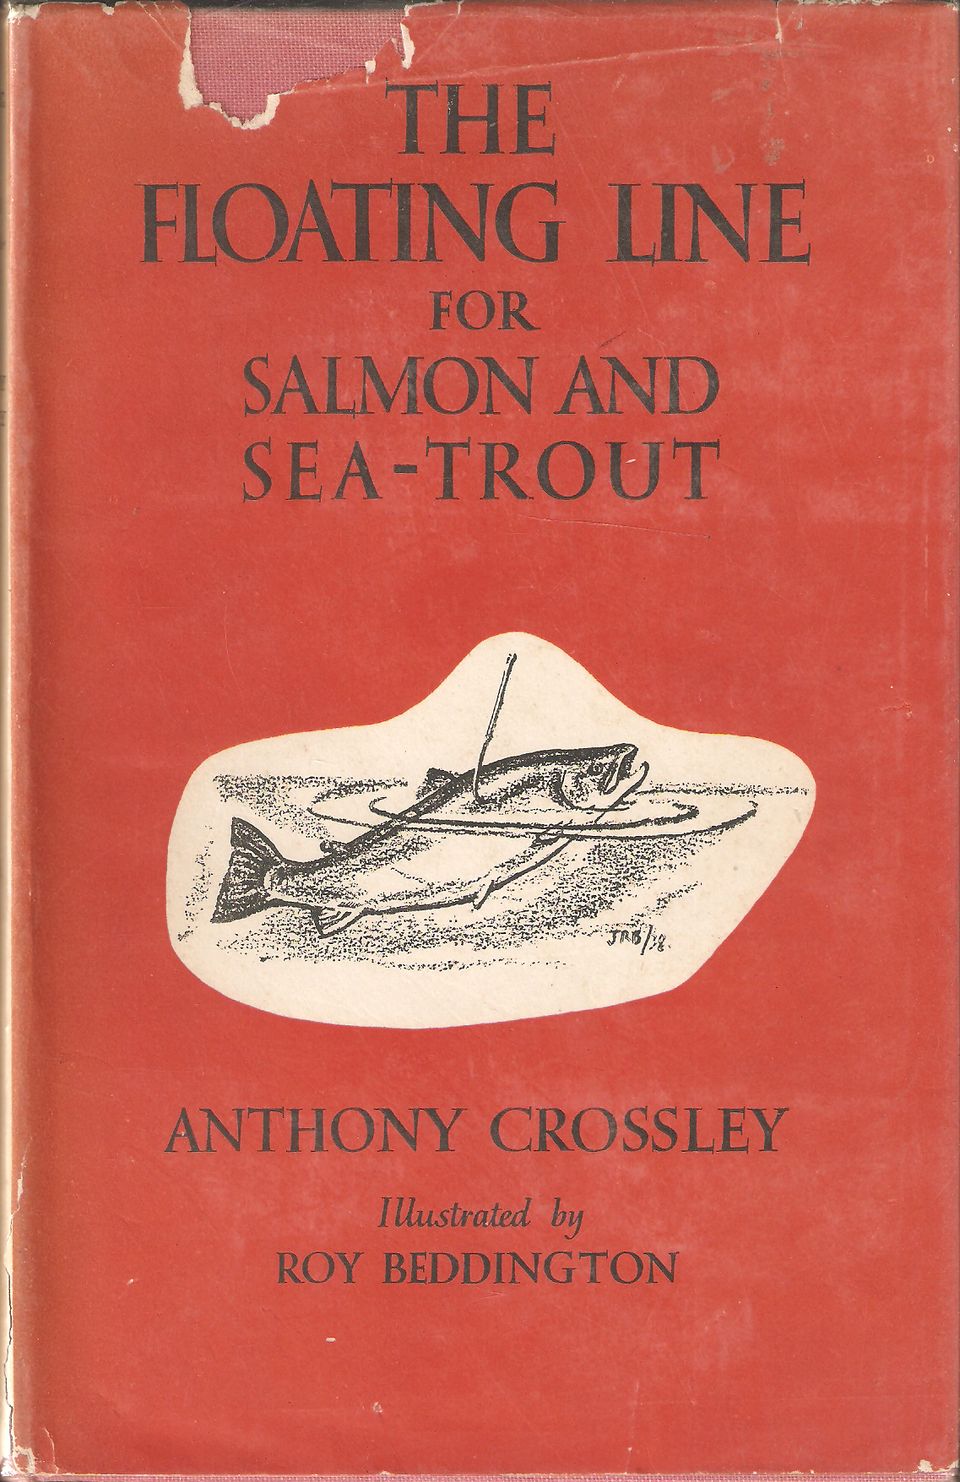 THE FLOATING LINE FOR SALMON AND SEA-TROUT. By Anthony Crossley